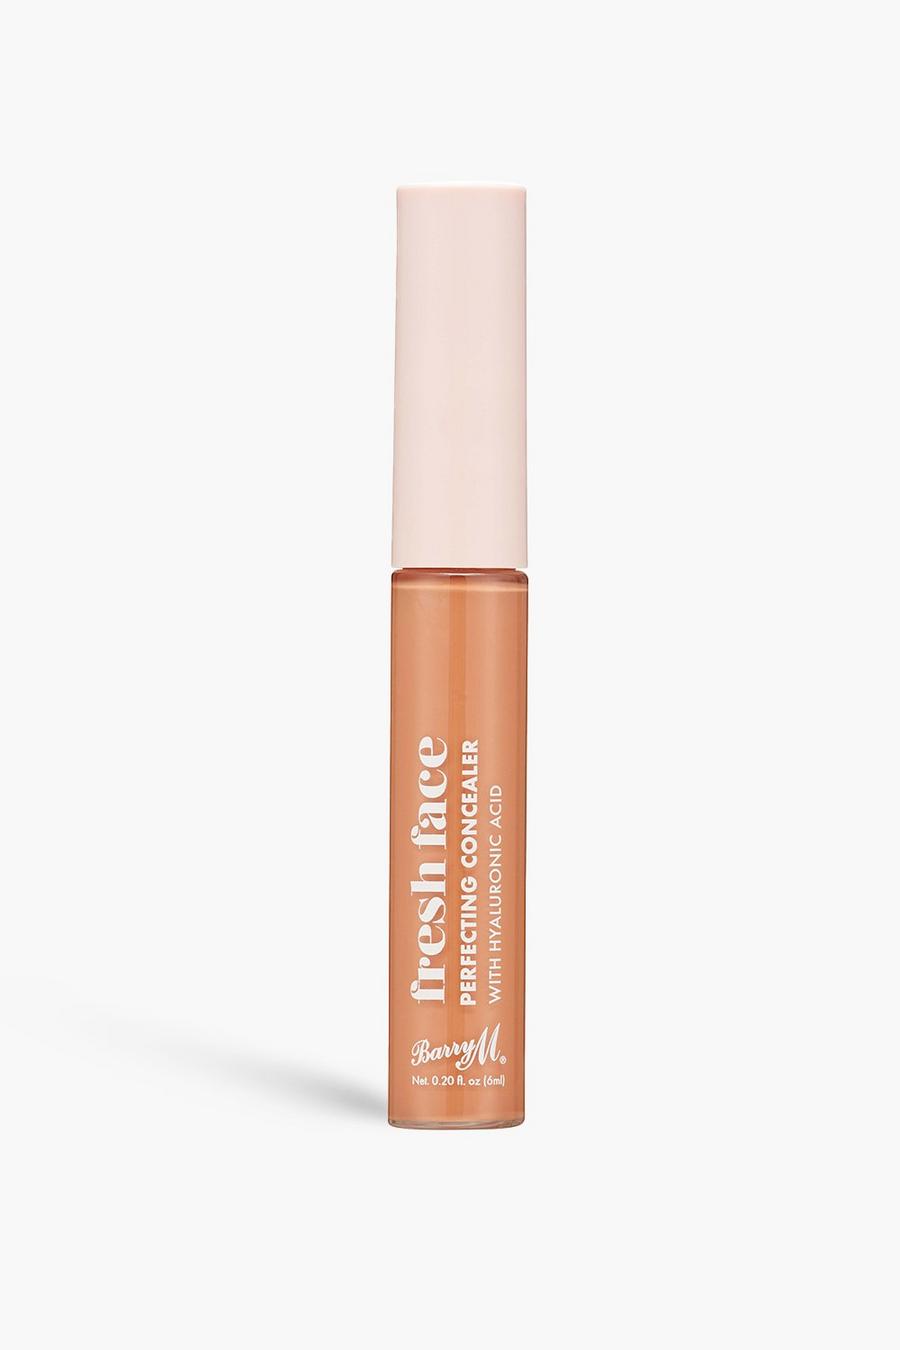 Tan brown Barry M Fresh Face Perfecting Concealer 8